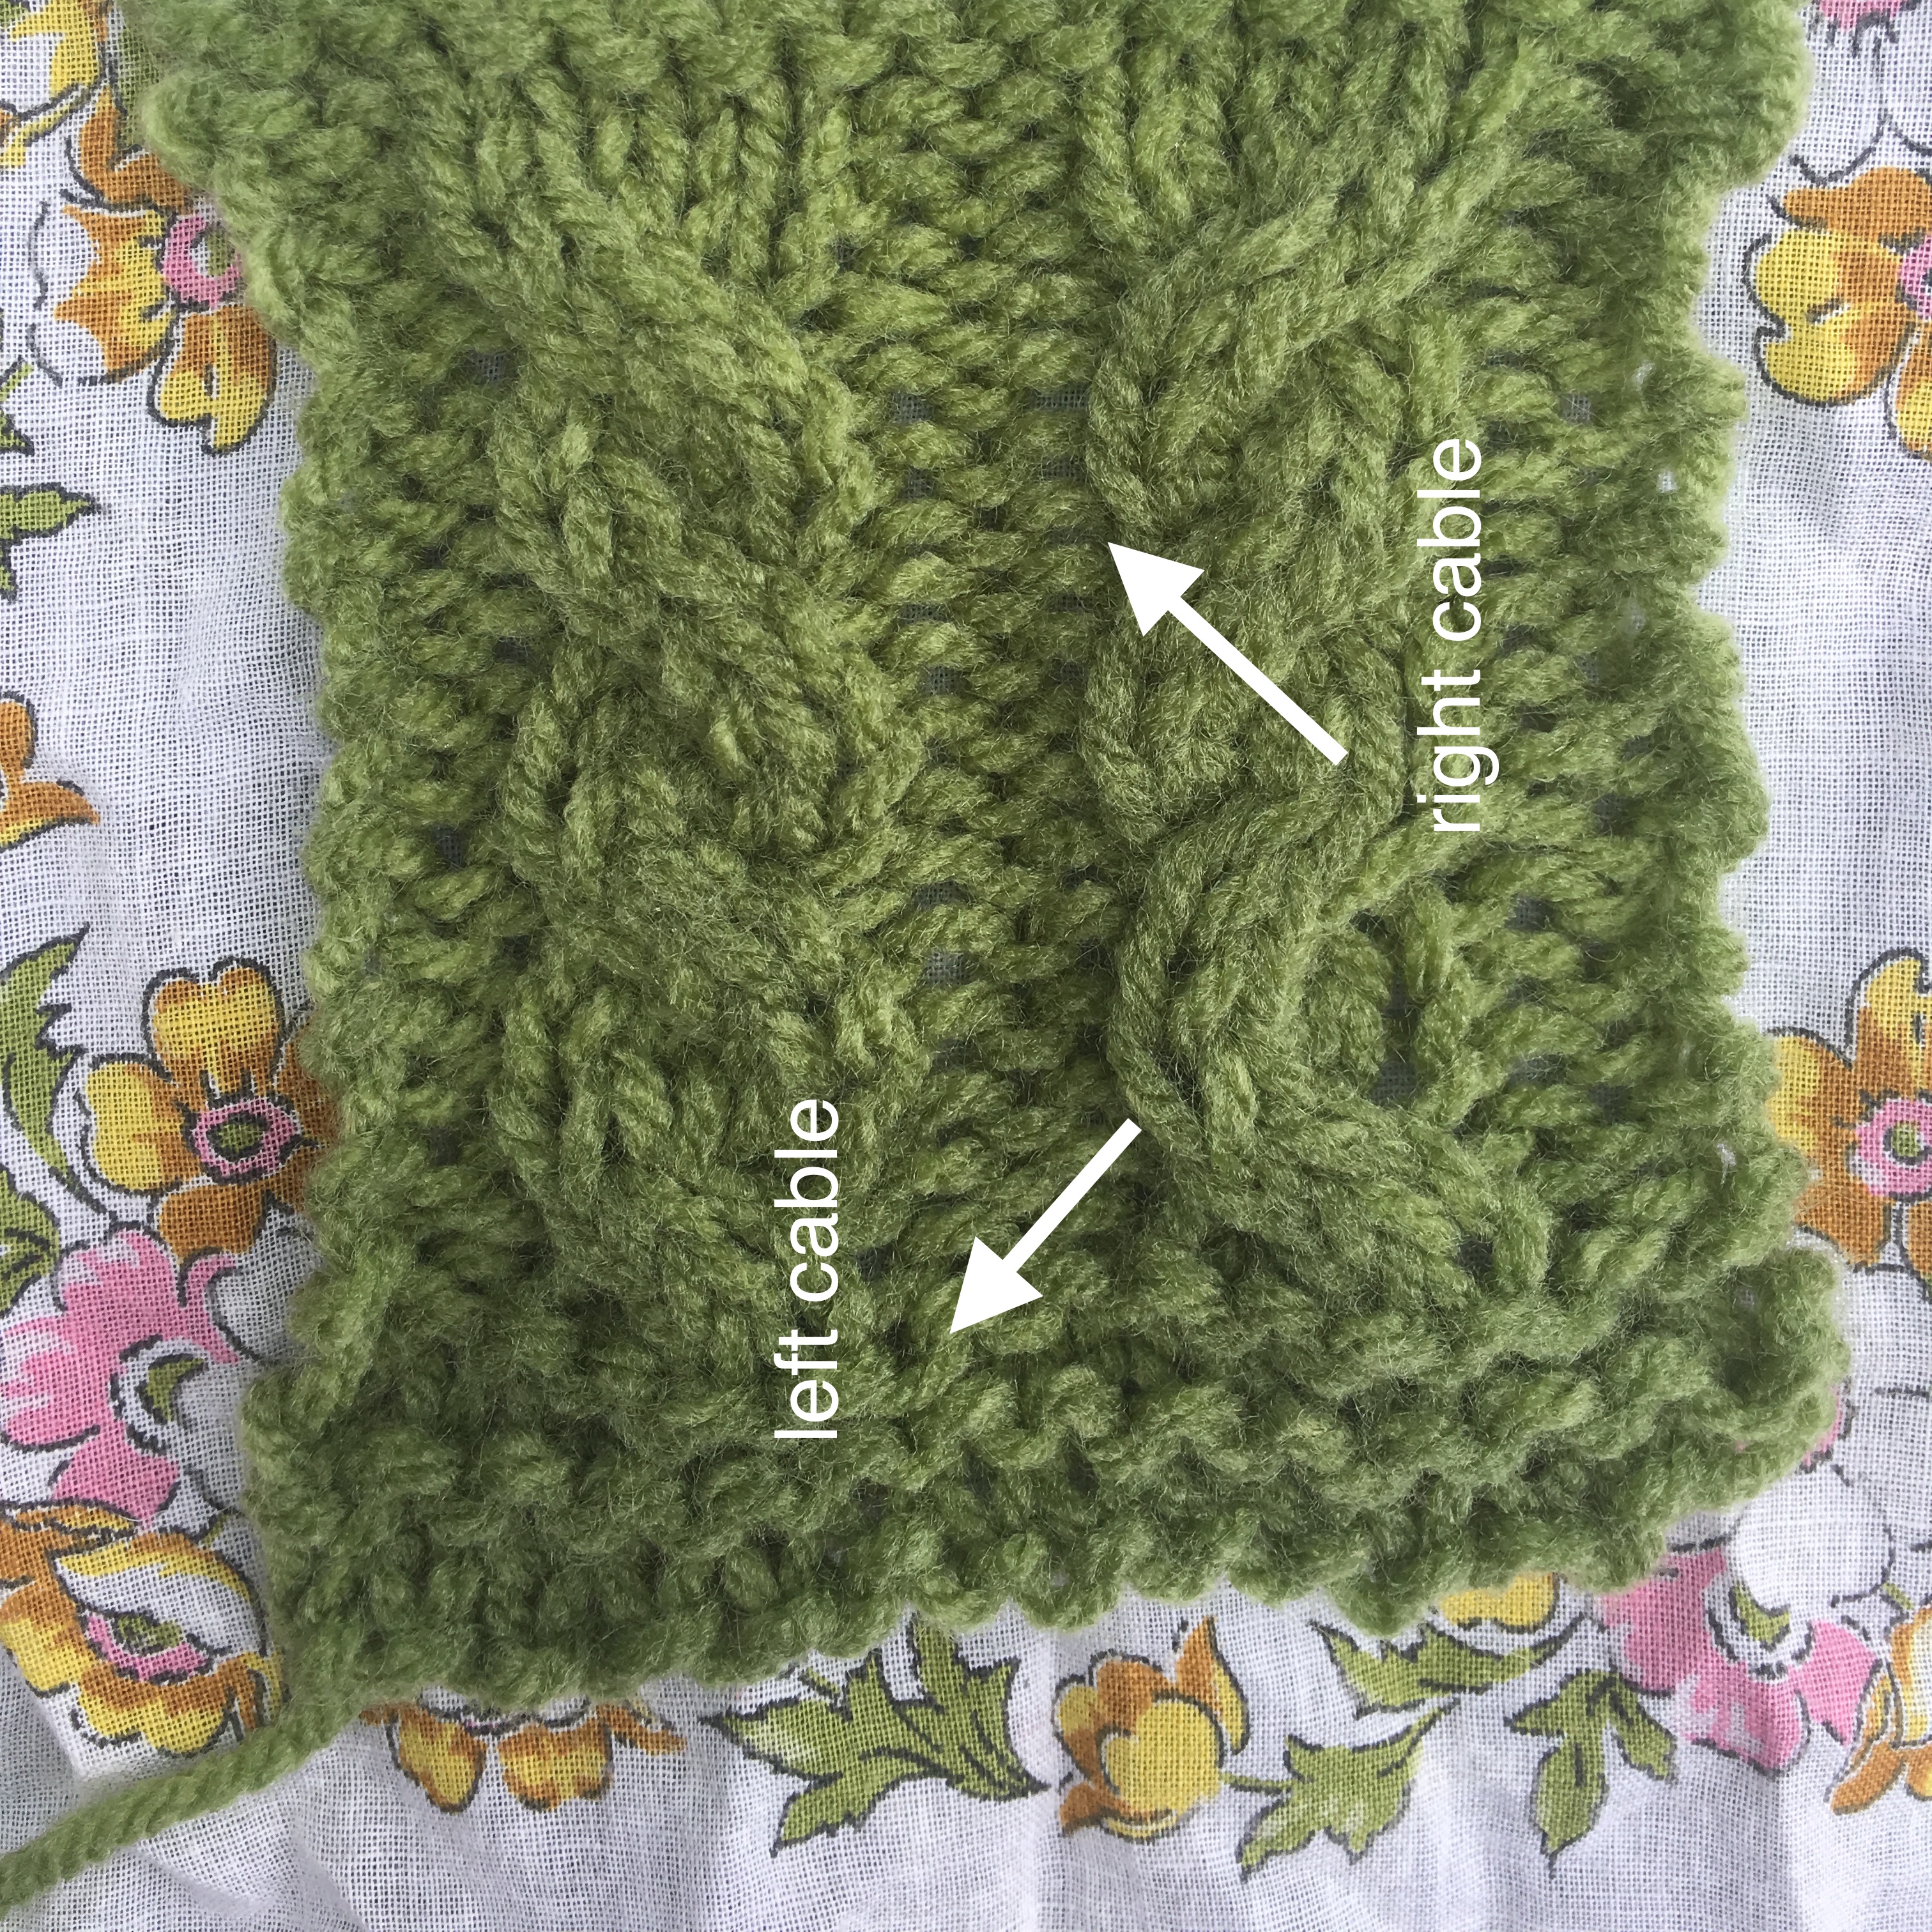 How to knit the Cable Stitch without a cable needle (Step-by-step tutorial)  